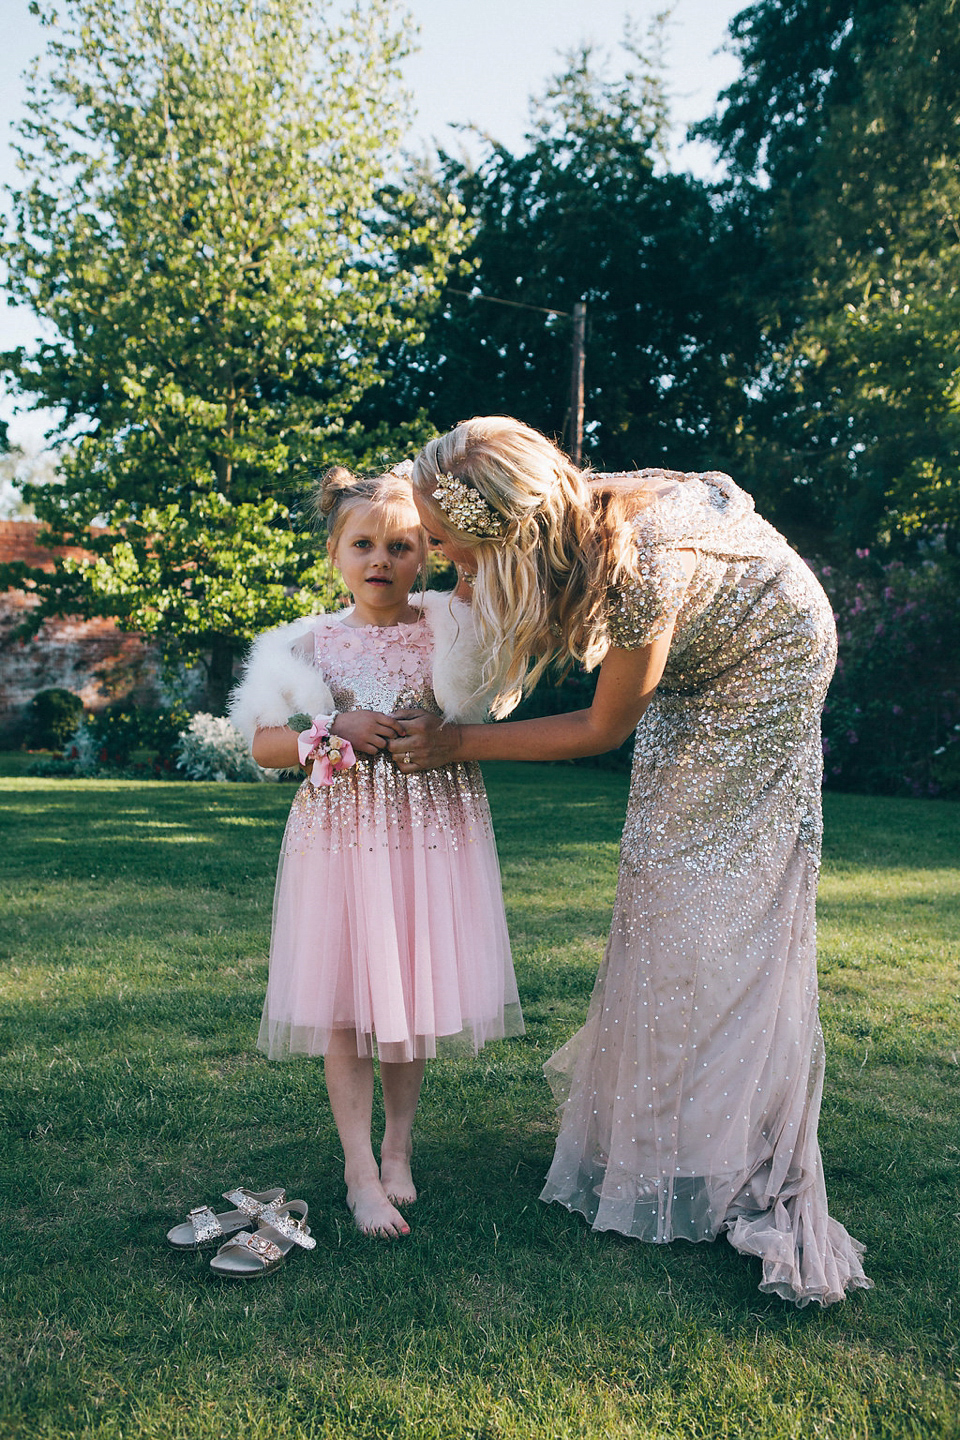 Sophie wears a gold, sequin Phase Eight gown for her wedding at The Norfolk Mead Hotel, an elegant Georgian boutique hotel in the heart of Norfolk. Photography by Joanna Millington.